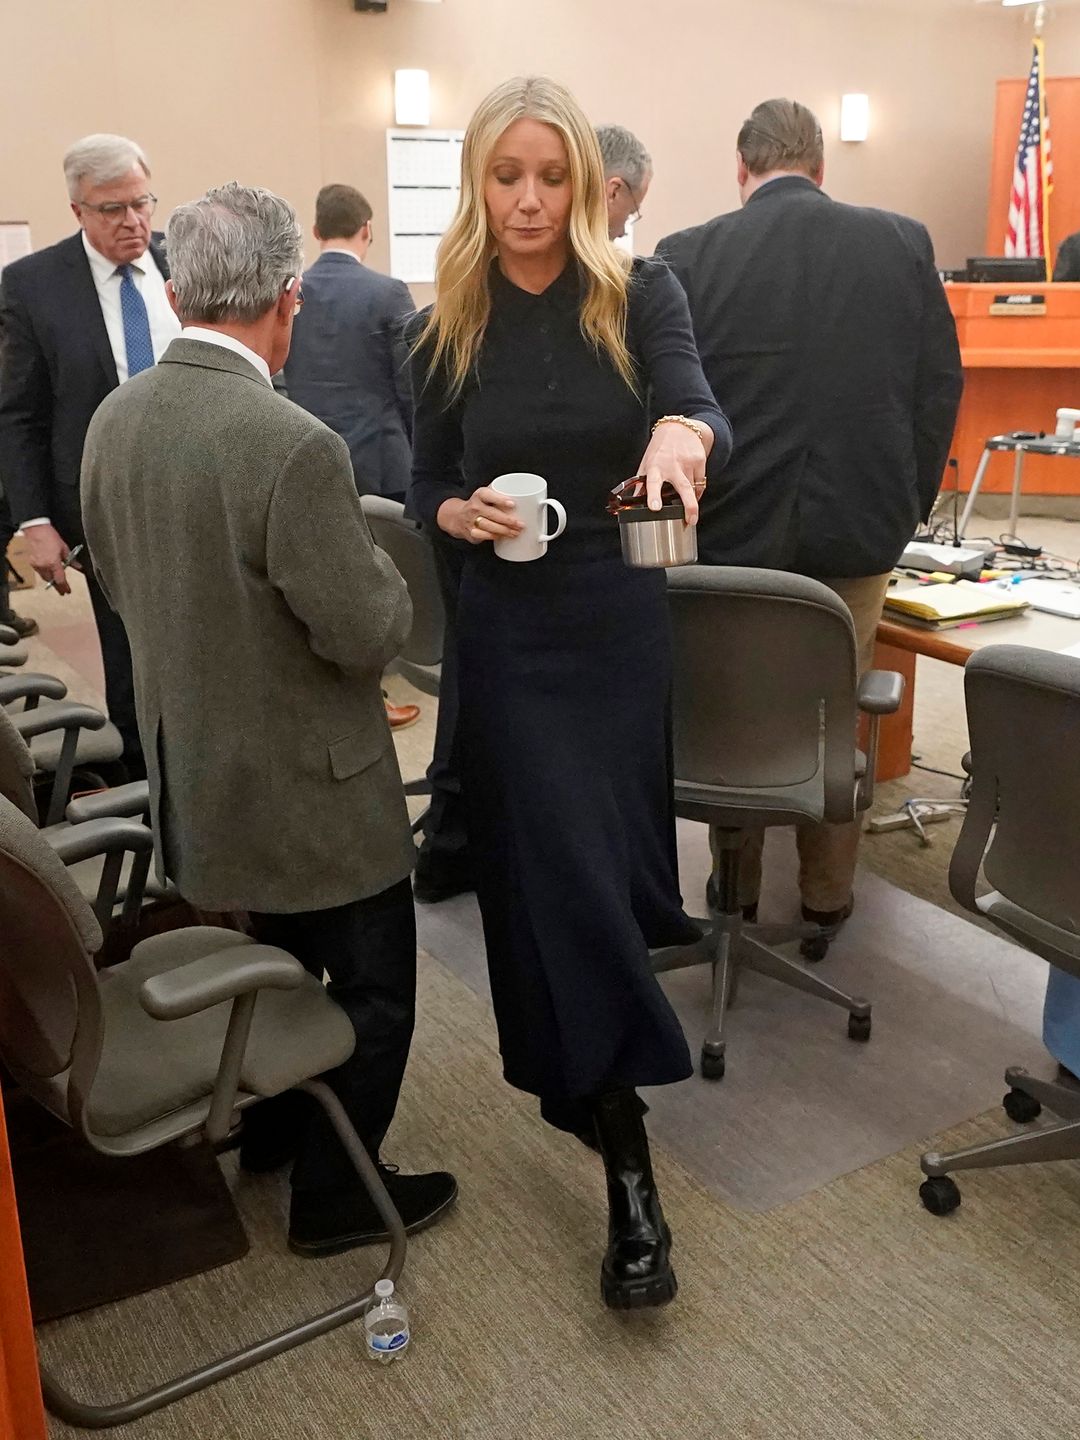 PARK CITY, UTAH - MARCH 24: Gwyneth Paltrow carries two beverages as she walks past the man suing her after testifying in court on March 24, 2023, in Park City, Utah. Terry Sanderson is suing actress Gwyneth Paltrow for $300,000, claiming she recklessly c